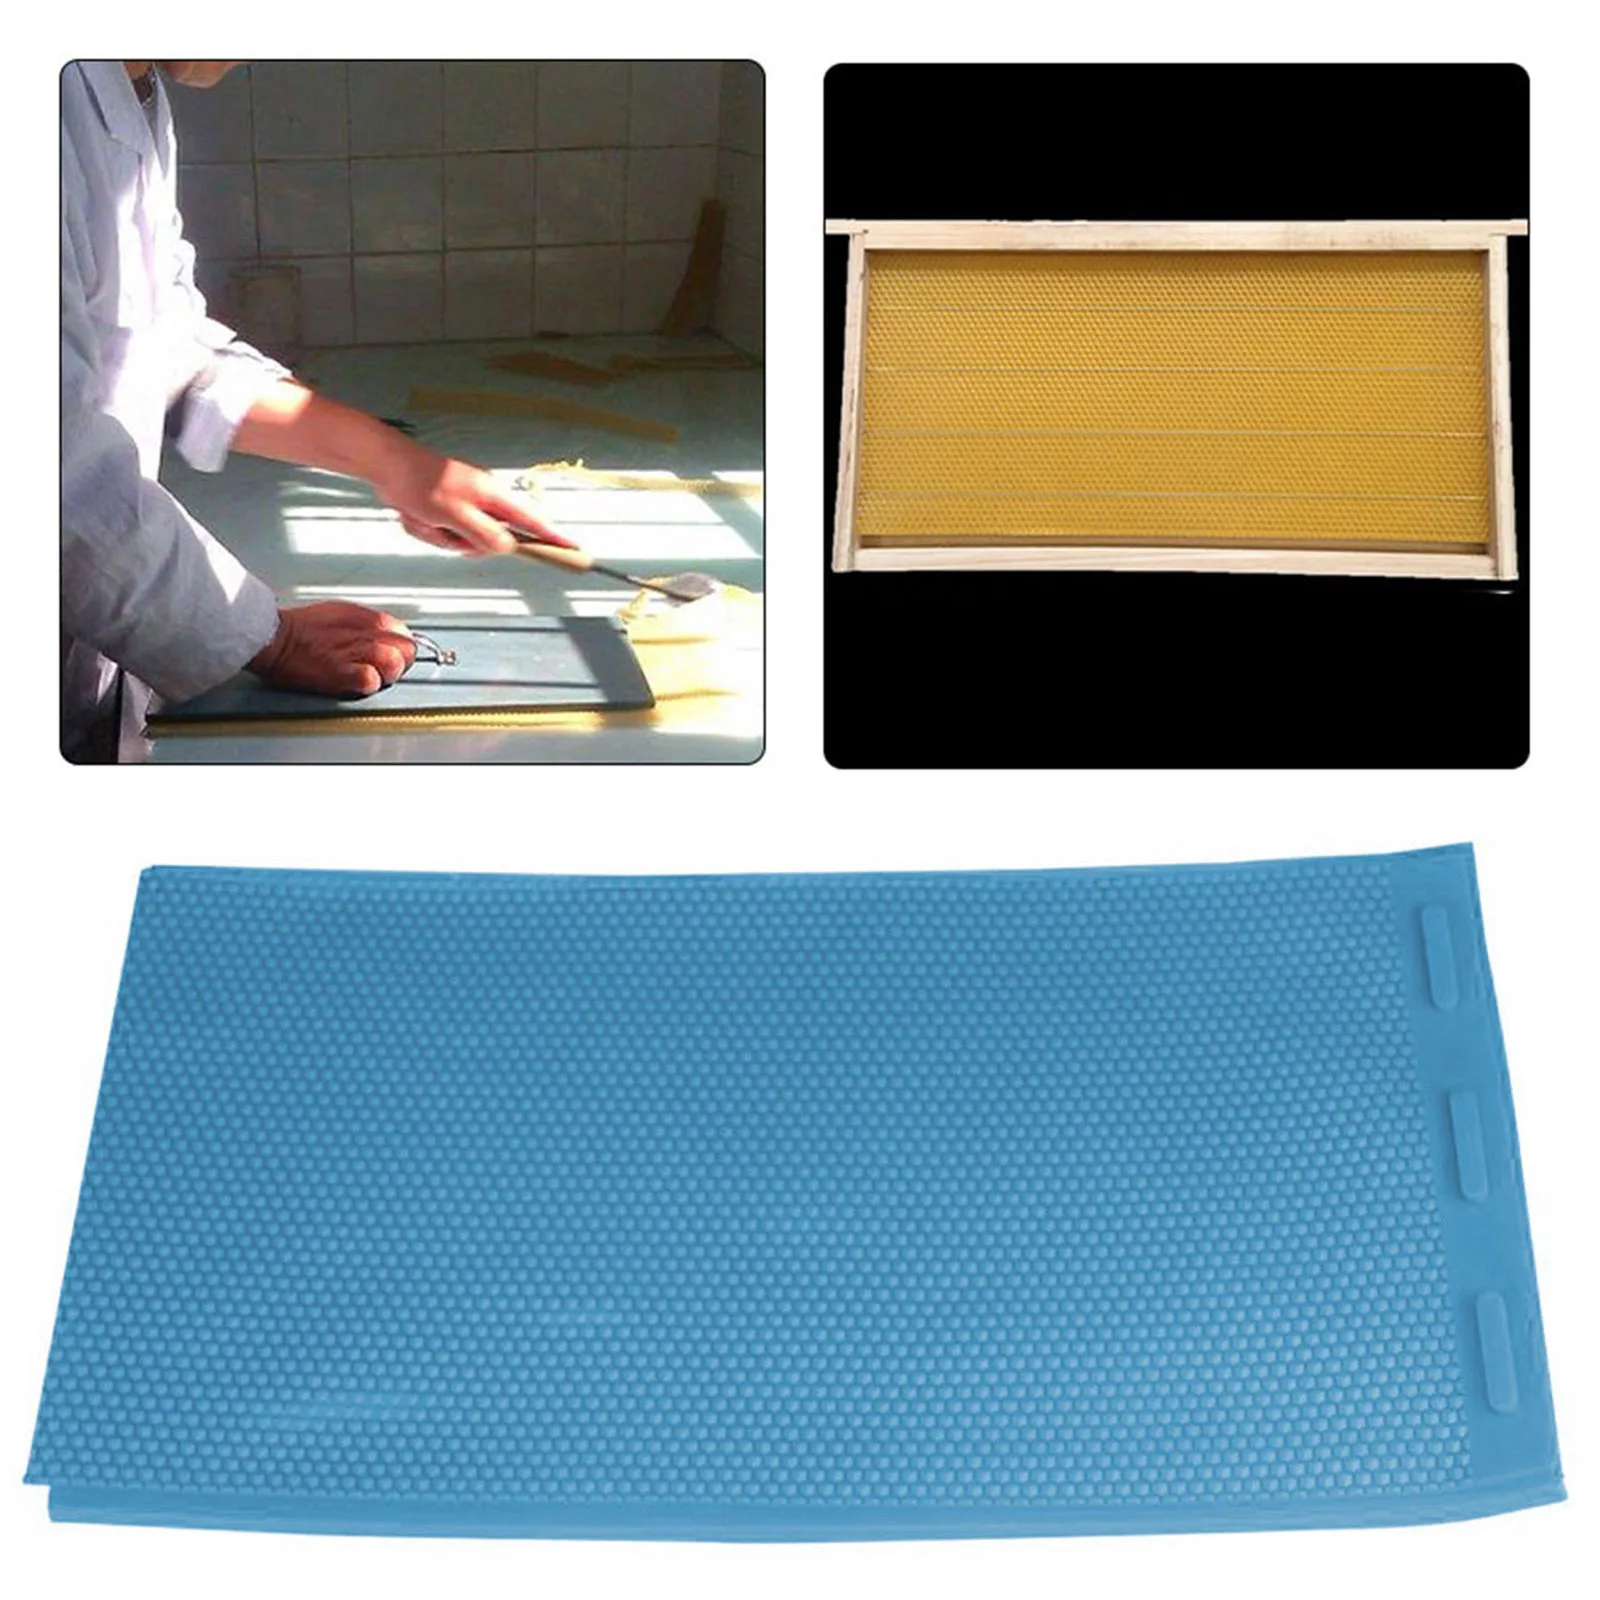 Beekeeping Beeswax Foundation Press Sheet Mould 2PCS for Candles, Cosmetics, Food, Craft etc